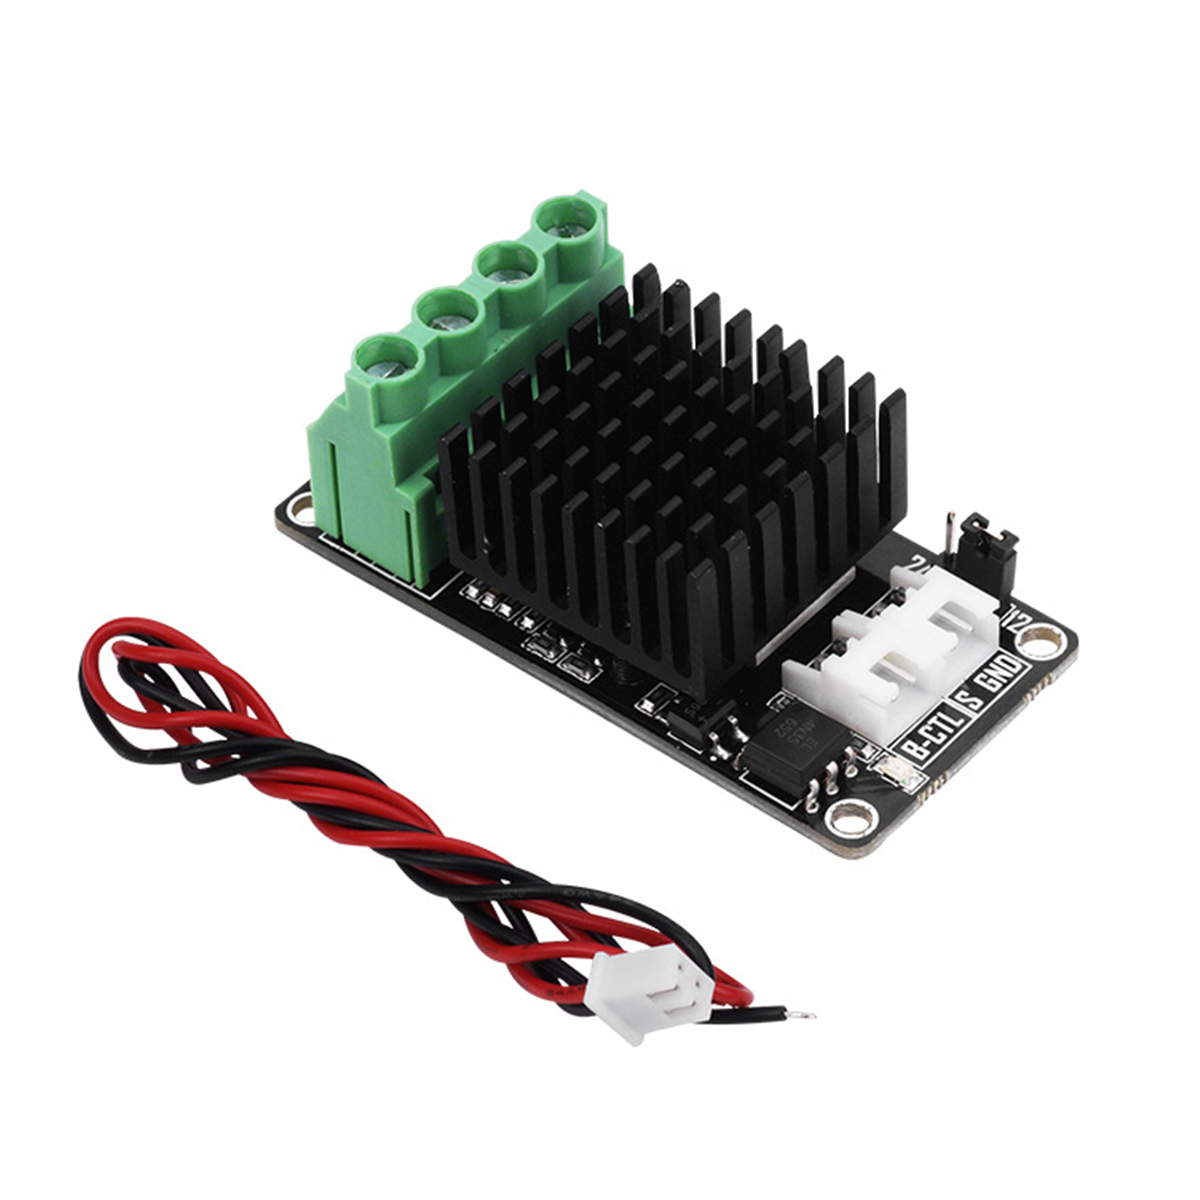 

30A Mini Hot Bed High-power MOS Module with Cable Suit Ramp1.4 & MKS Series for 3D Printer